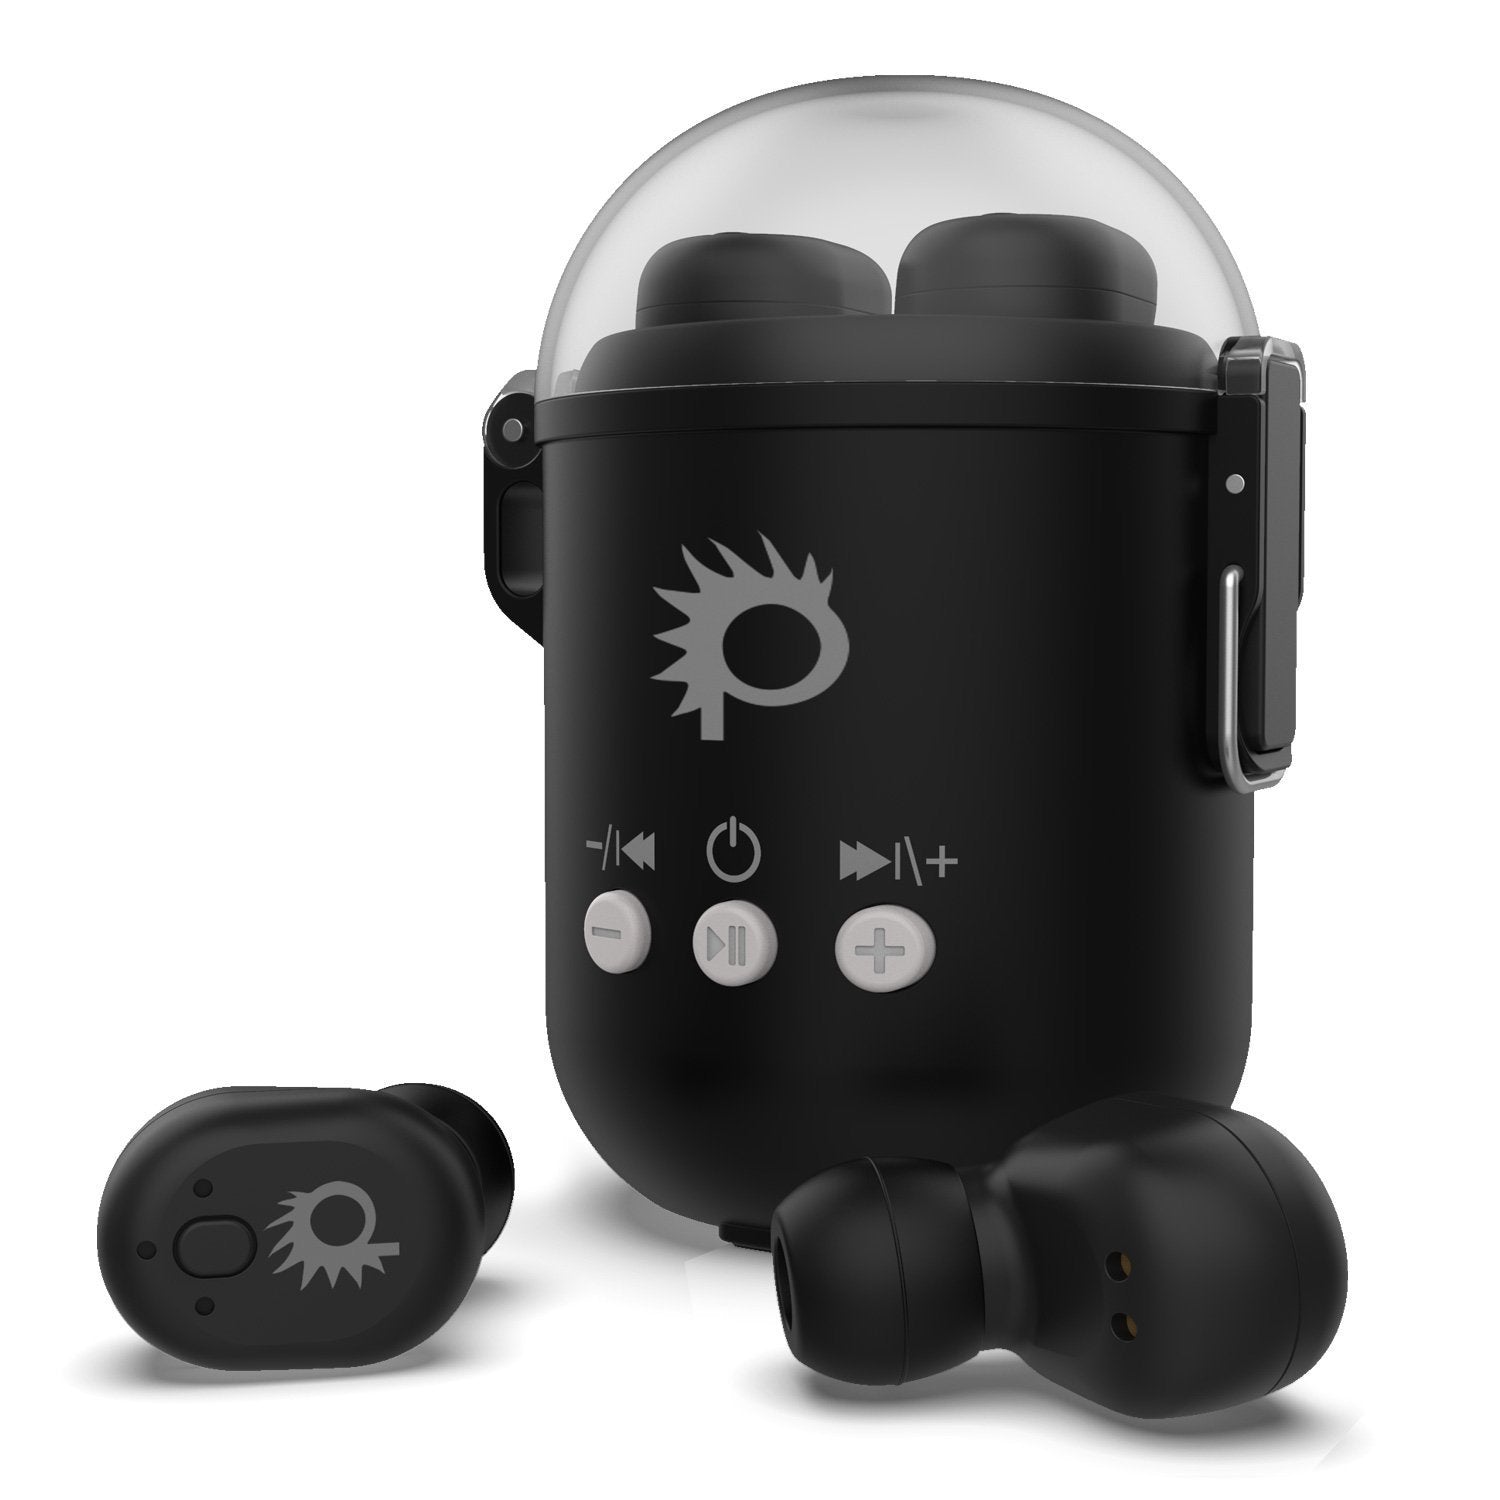 PunkBuds Capsule True Wireless Bluetooth Earbuds W/Noise Cancelling Mic IP67 Waterproof Storage & Fast Charger Case W/Built-In Speaker, Reliable Bluetooth 4.1 Technology & Long Battery Life [Black]